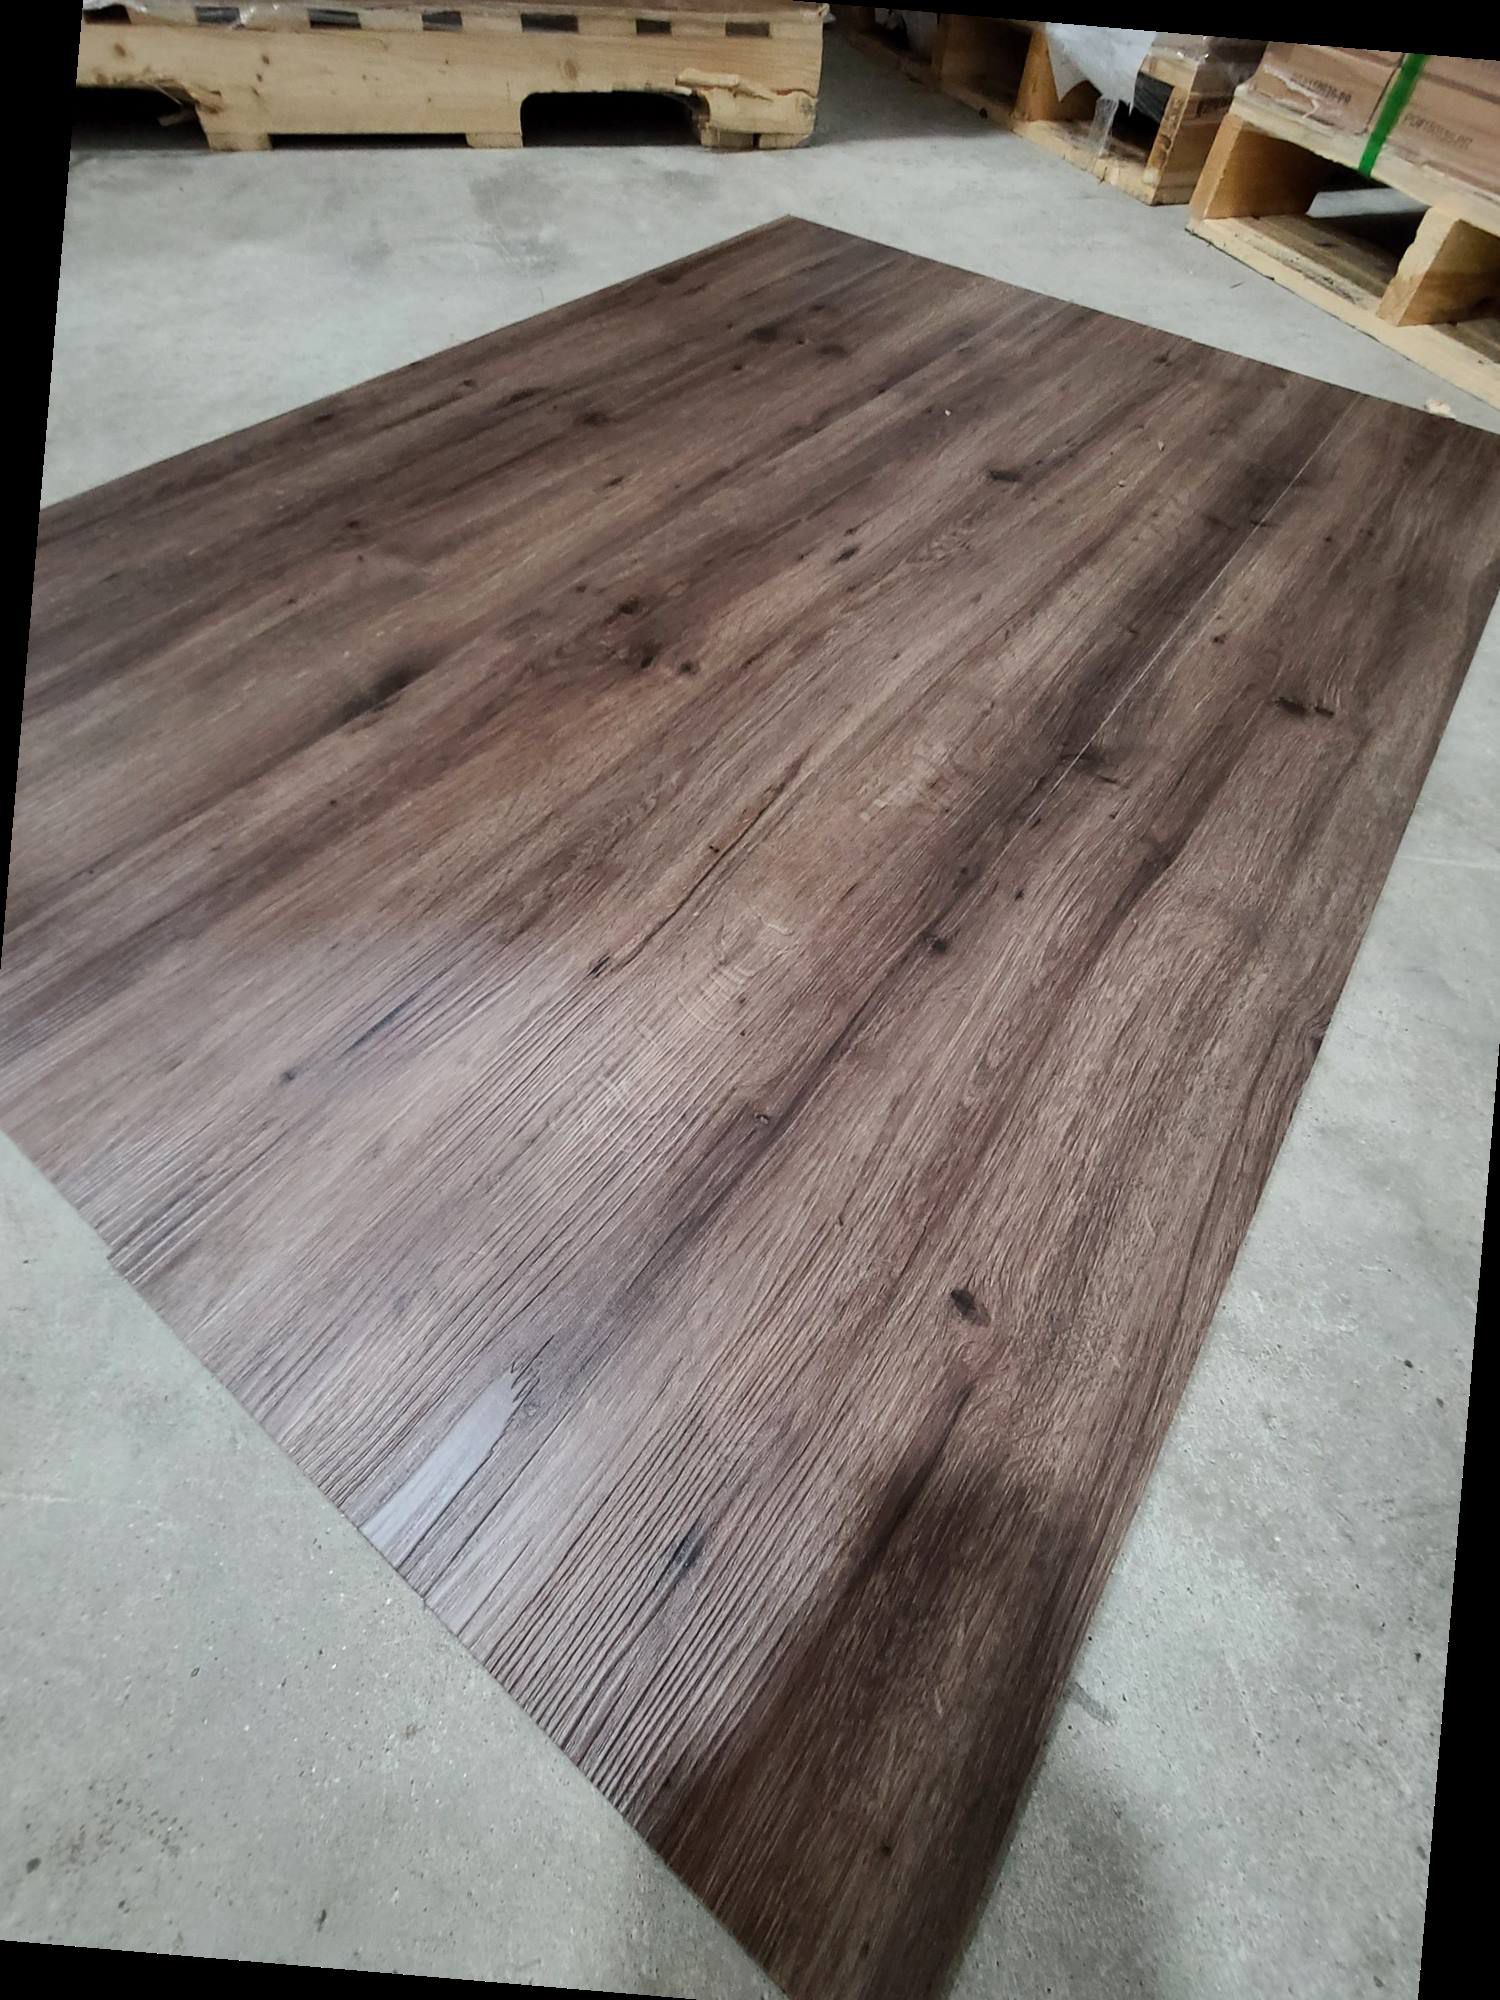 Luxury vinyl flooring!!! Only .67 cents a sq ft!! Liquidation close out! 870